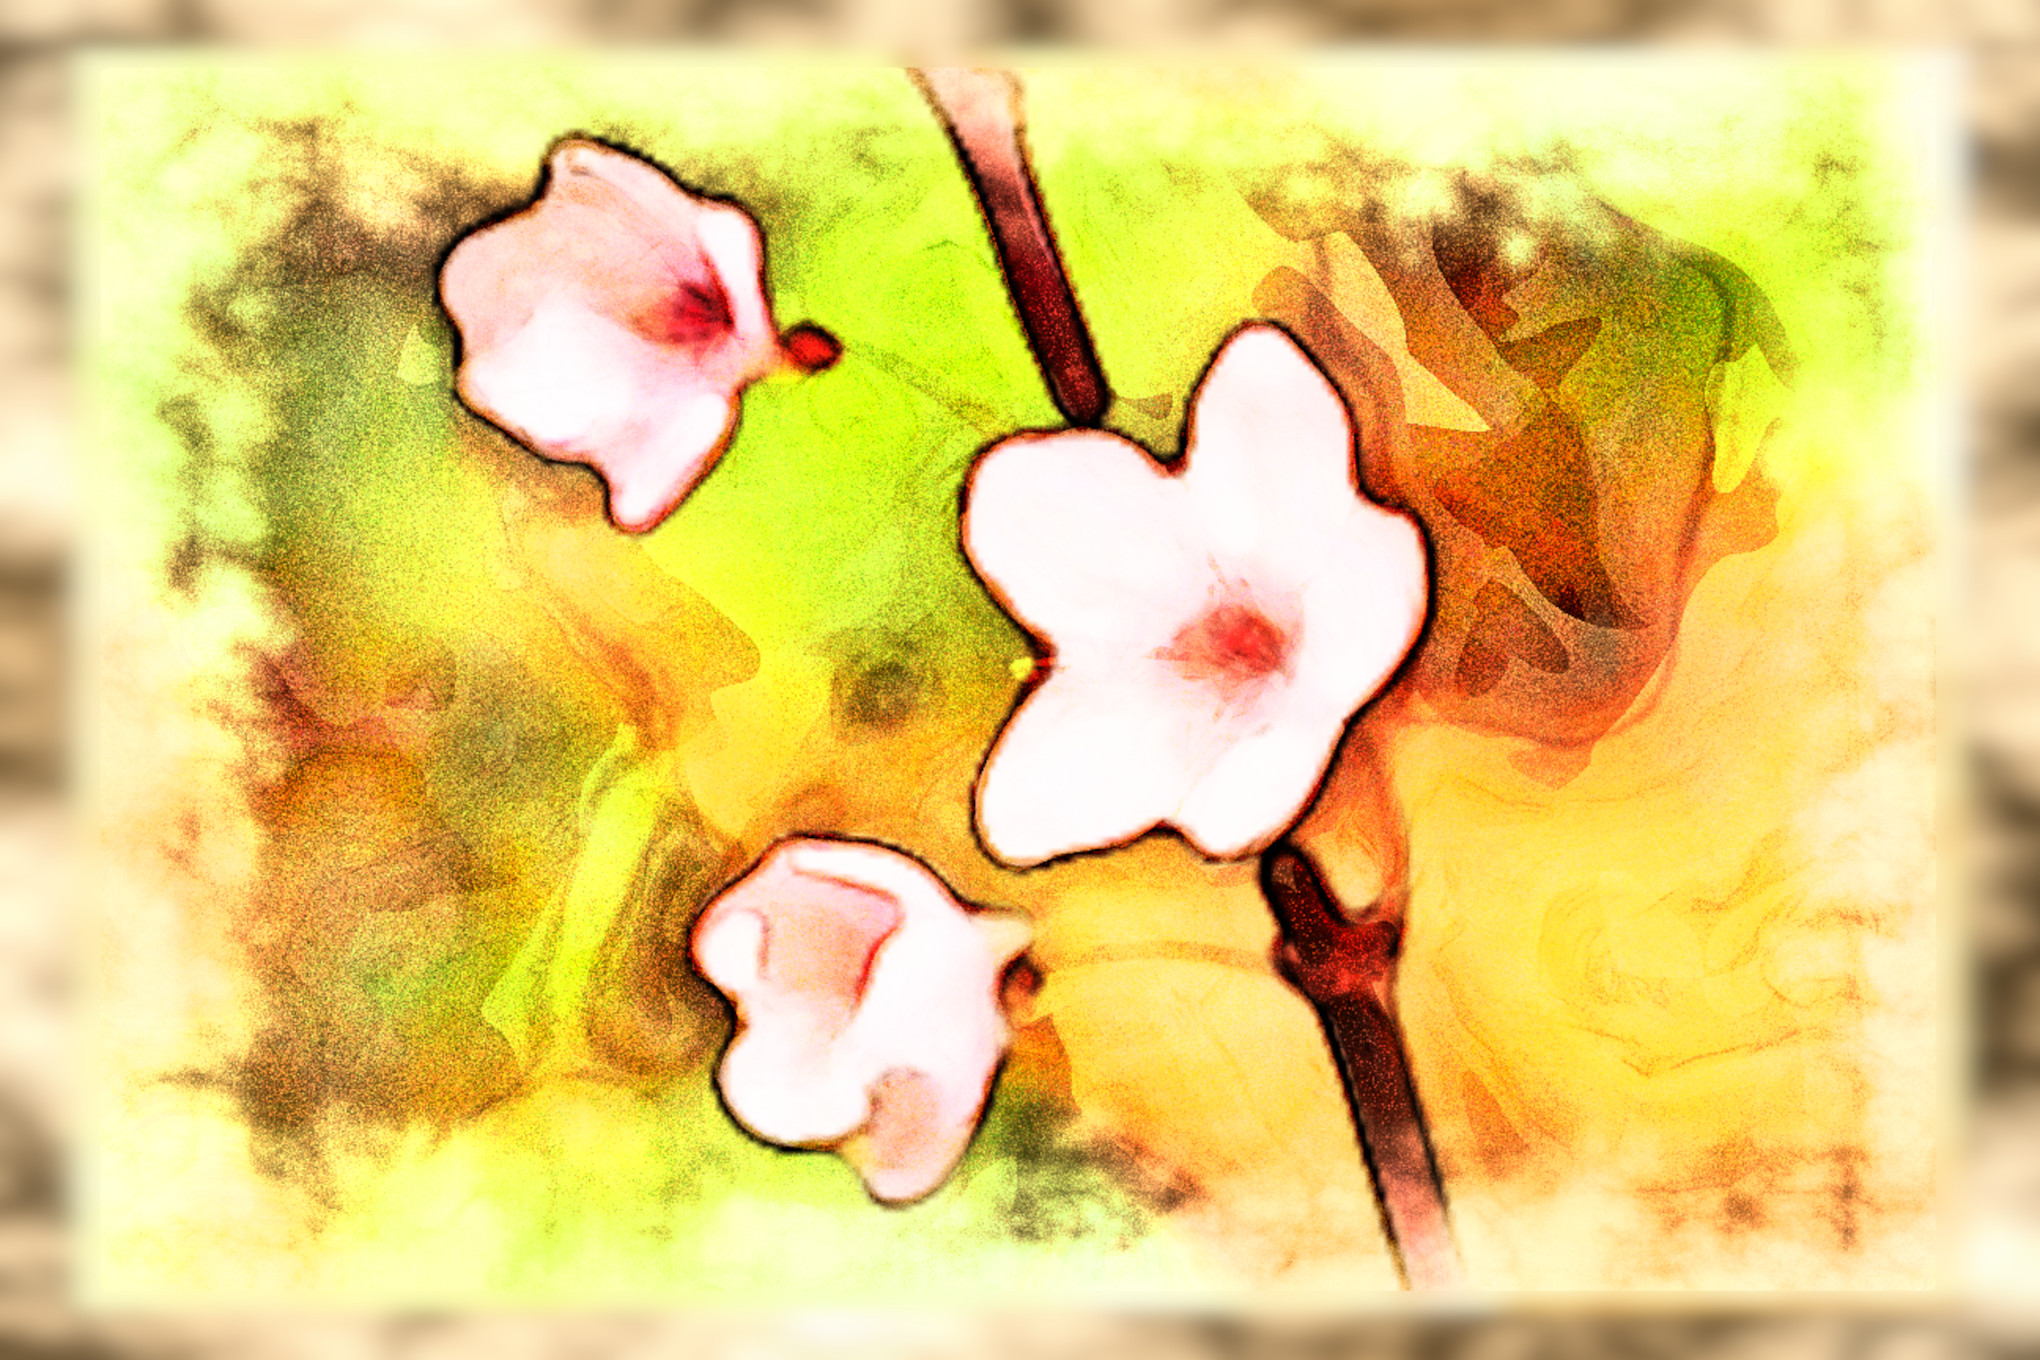 2023-10-04 09-31-57 plum-blossom-6144845 with a Watercolor Pastels Effect 2023 (20.0,100.0,30.0,50.0,100.0,8.0,75.0,True,0).jpg